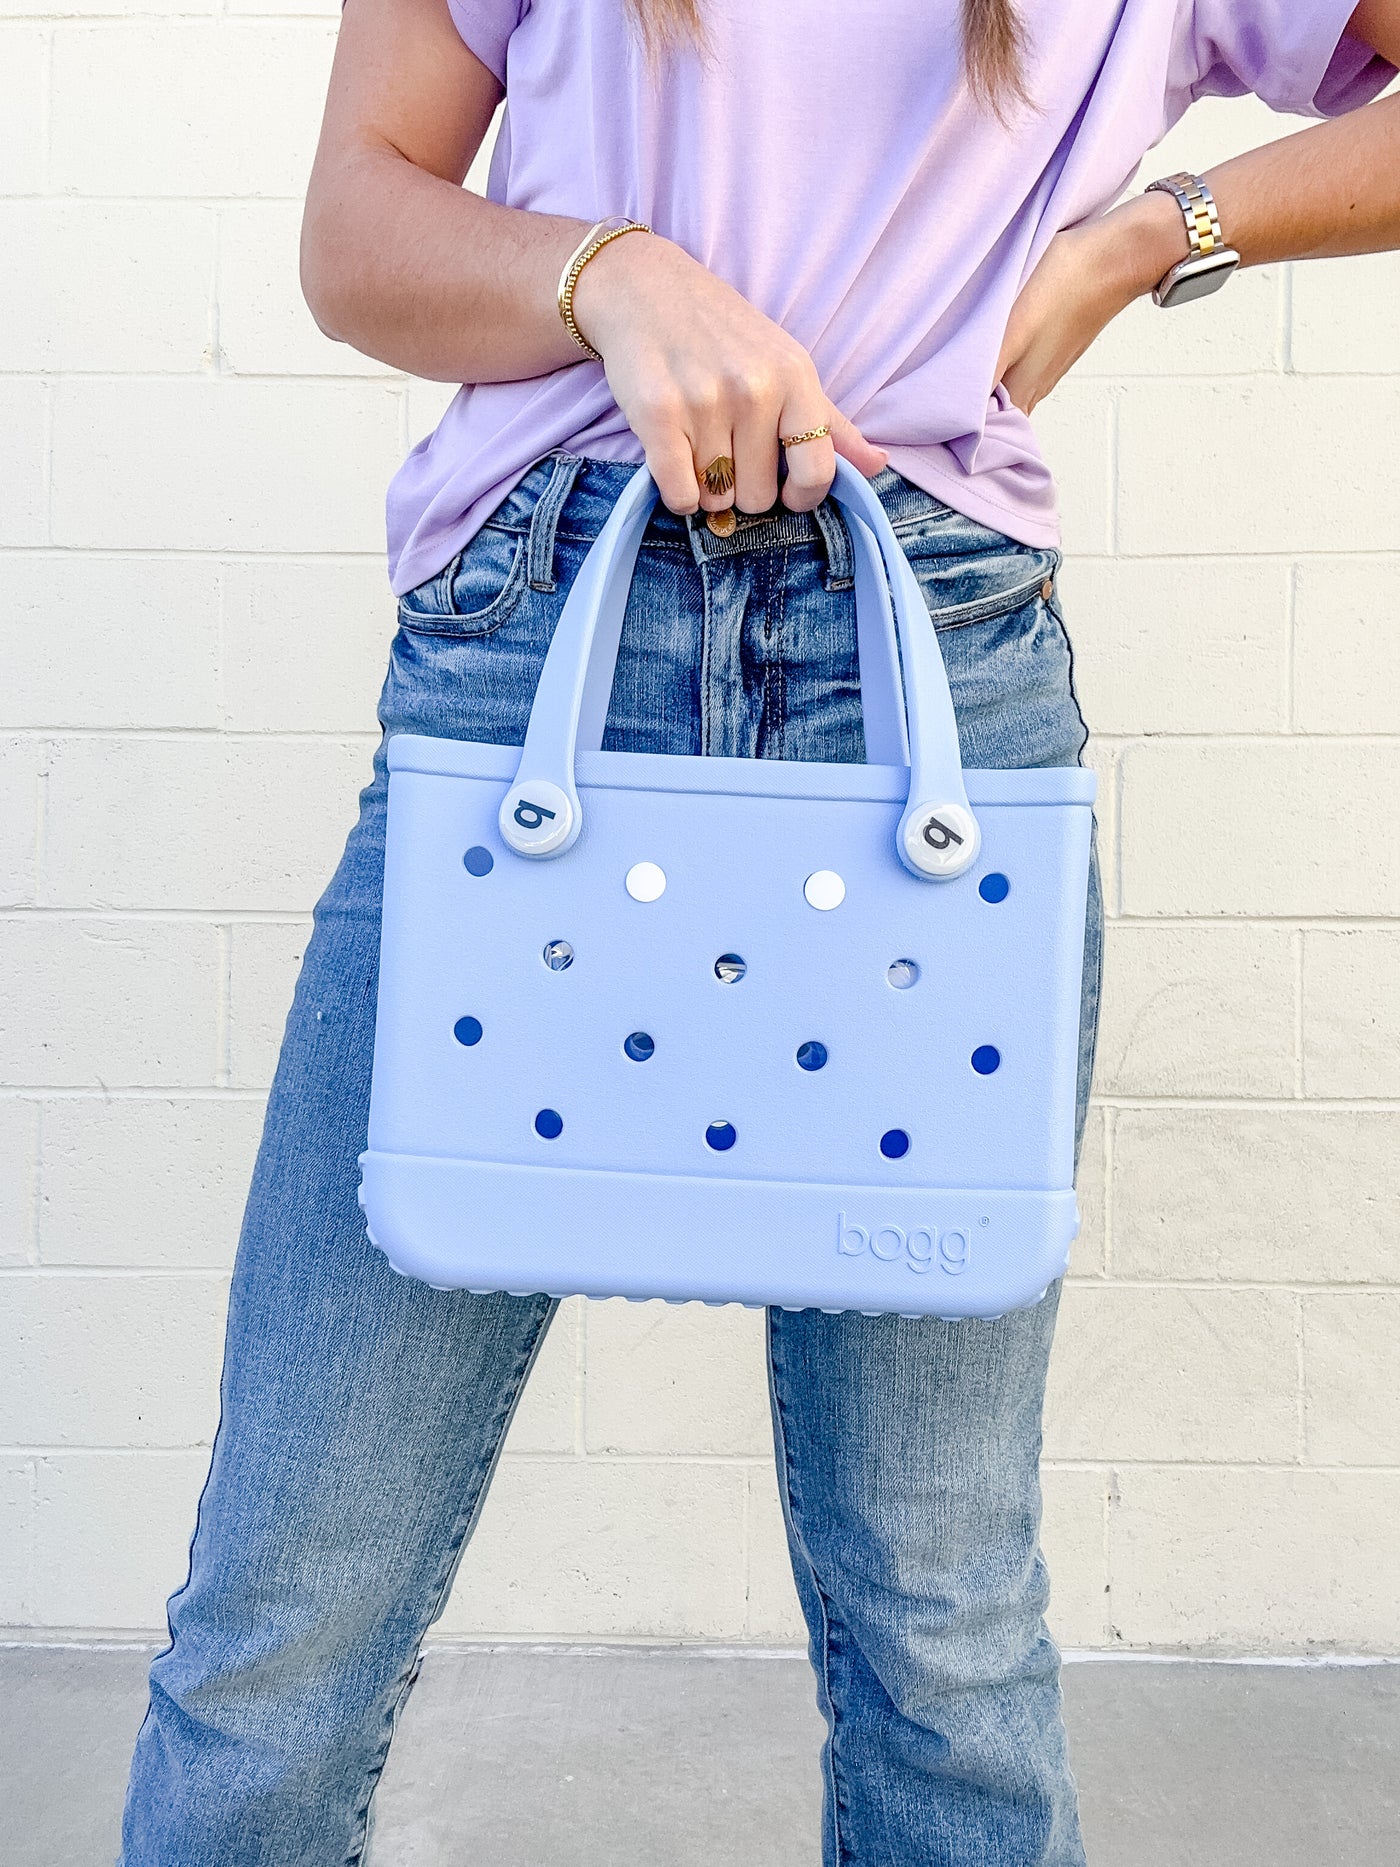 Bitty Bogg Bag – The Preppy Pineapple OIB